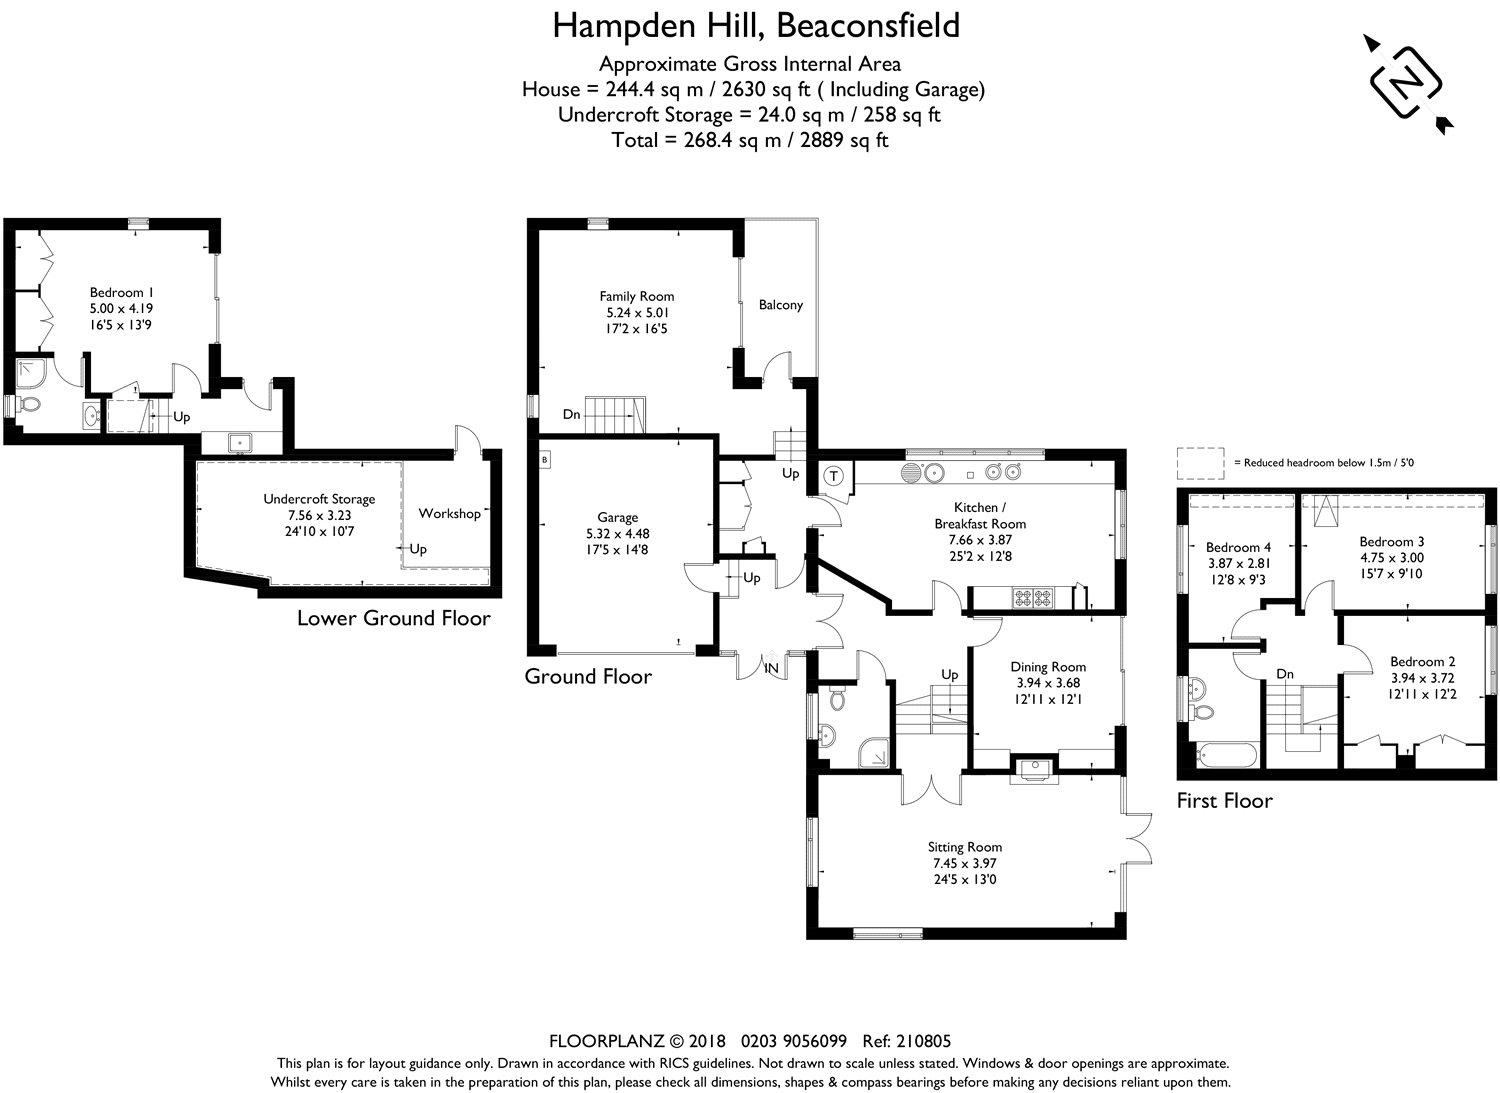 4 Bedrooms Detached house for sale in Hampden Hill, Beaconsfield, Buckinghamshire HP9